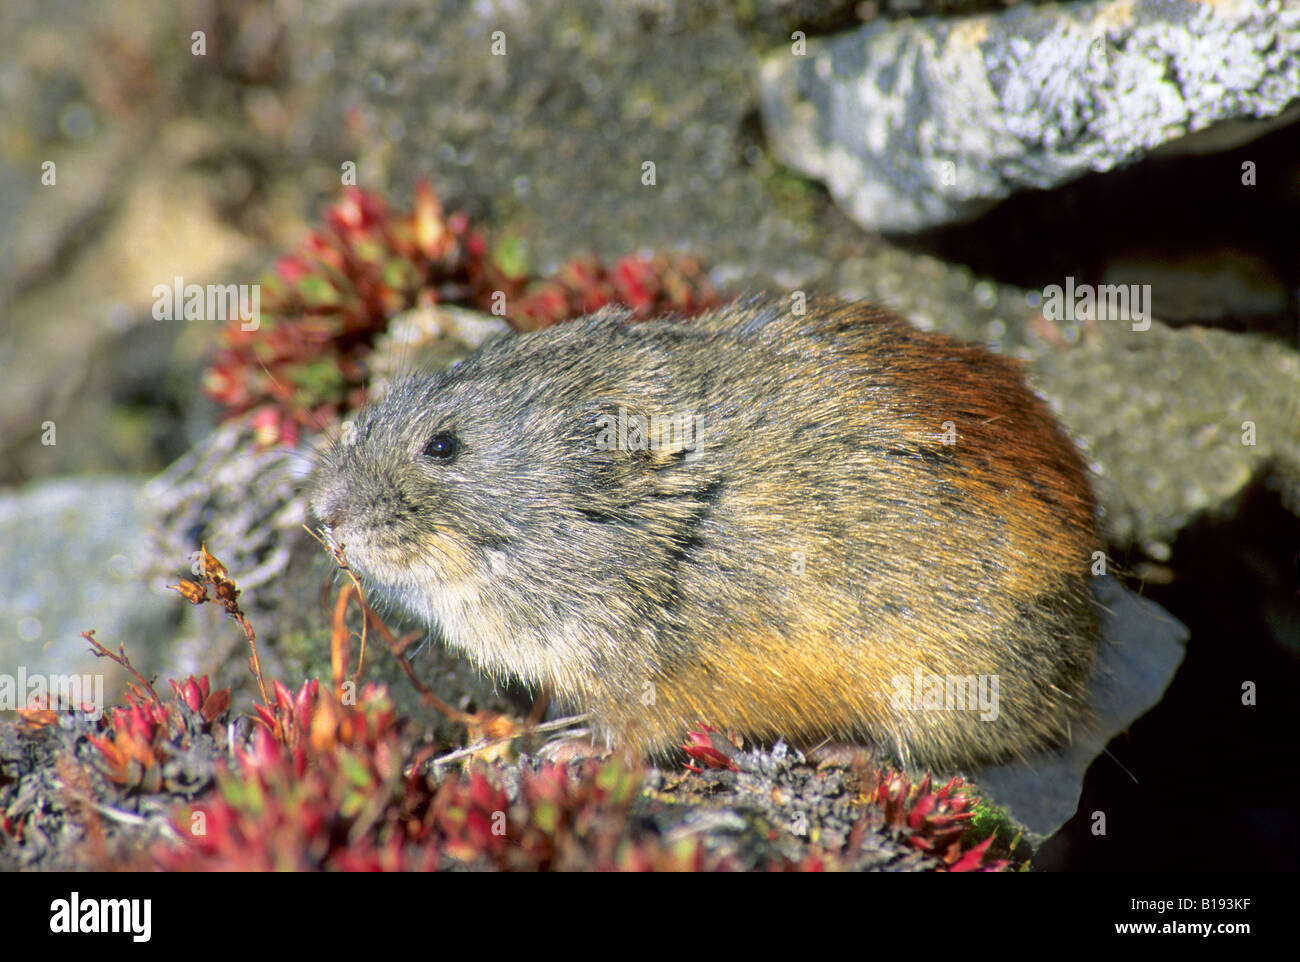 Left . As most lemmings, the brown lemming has cryptic brown and